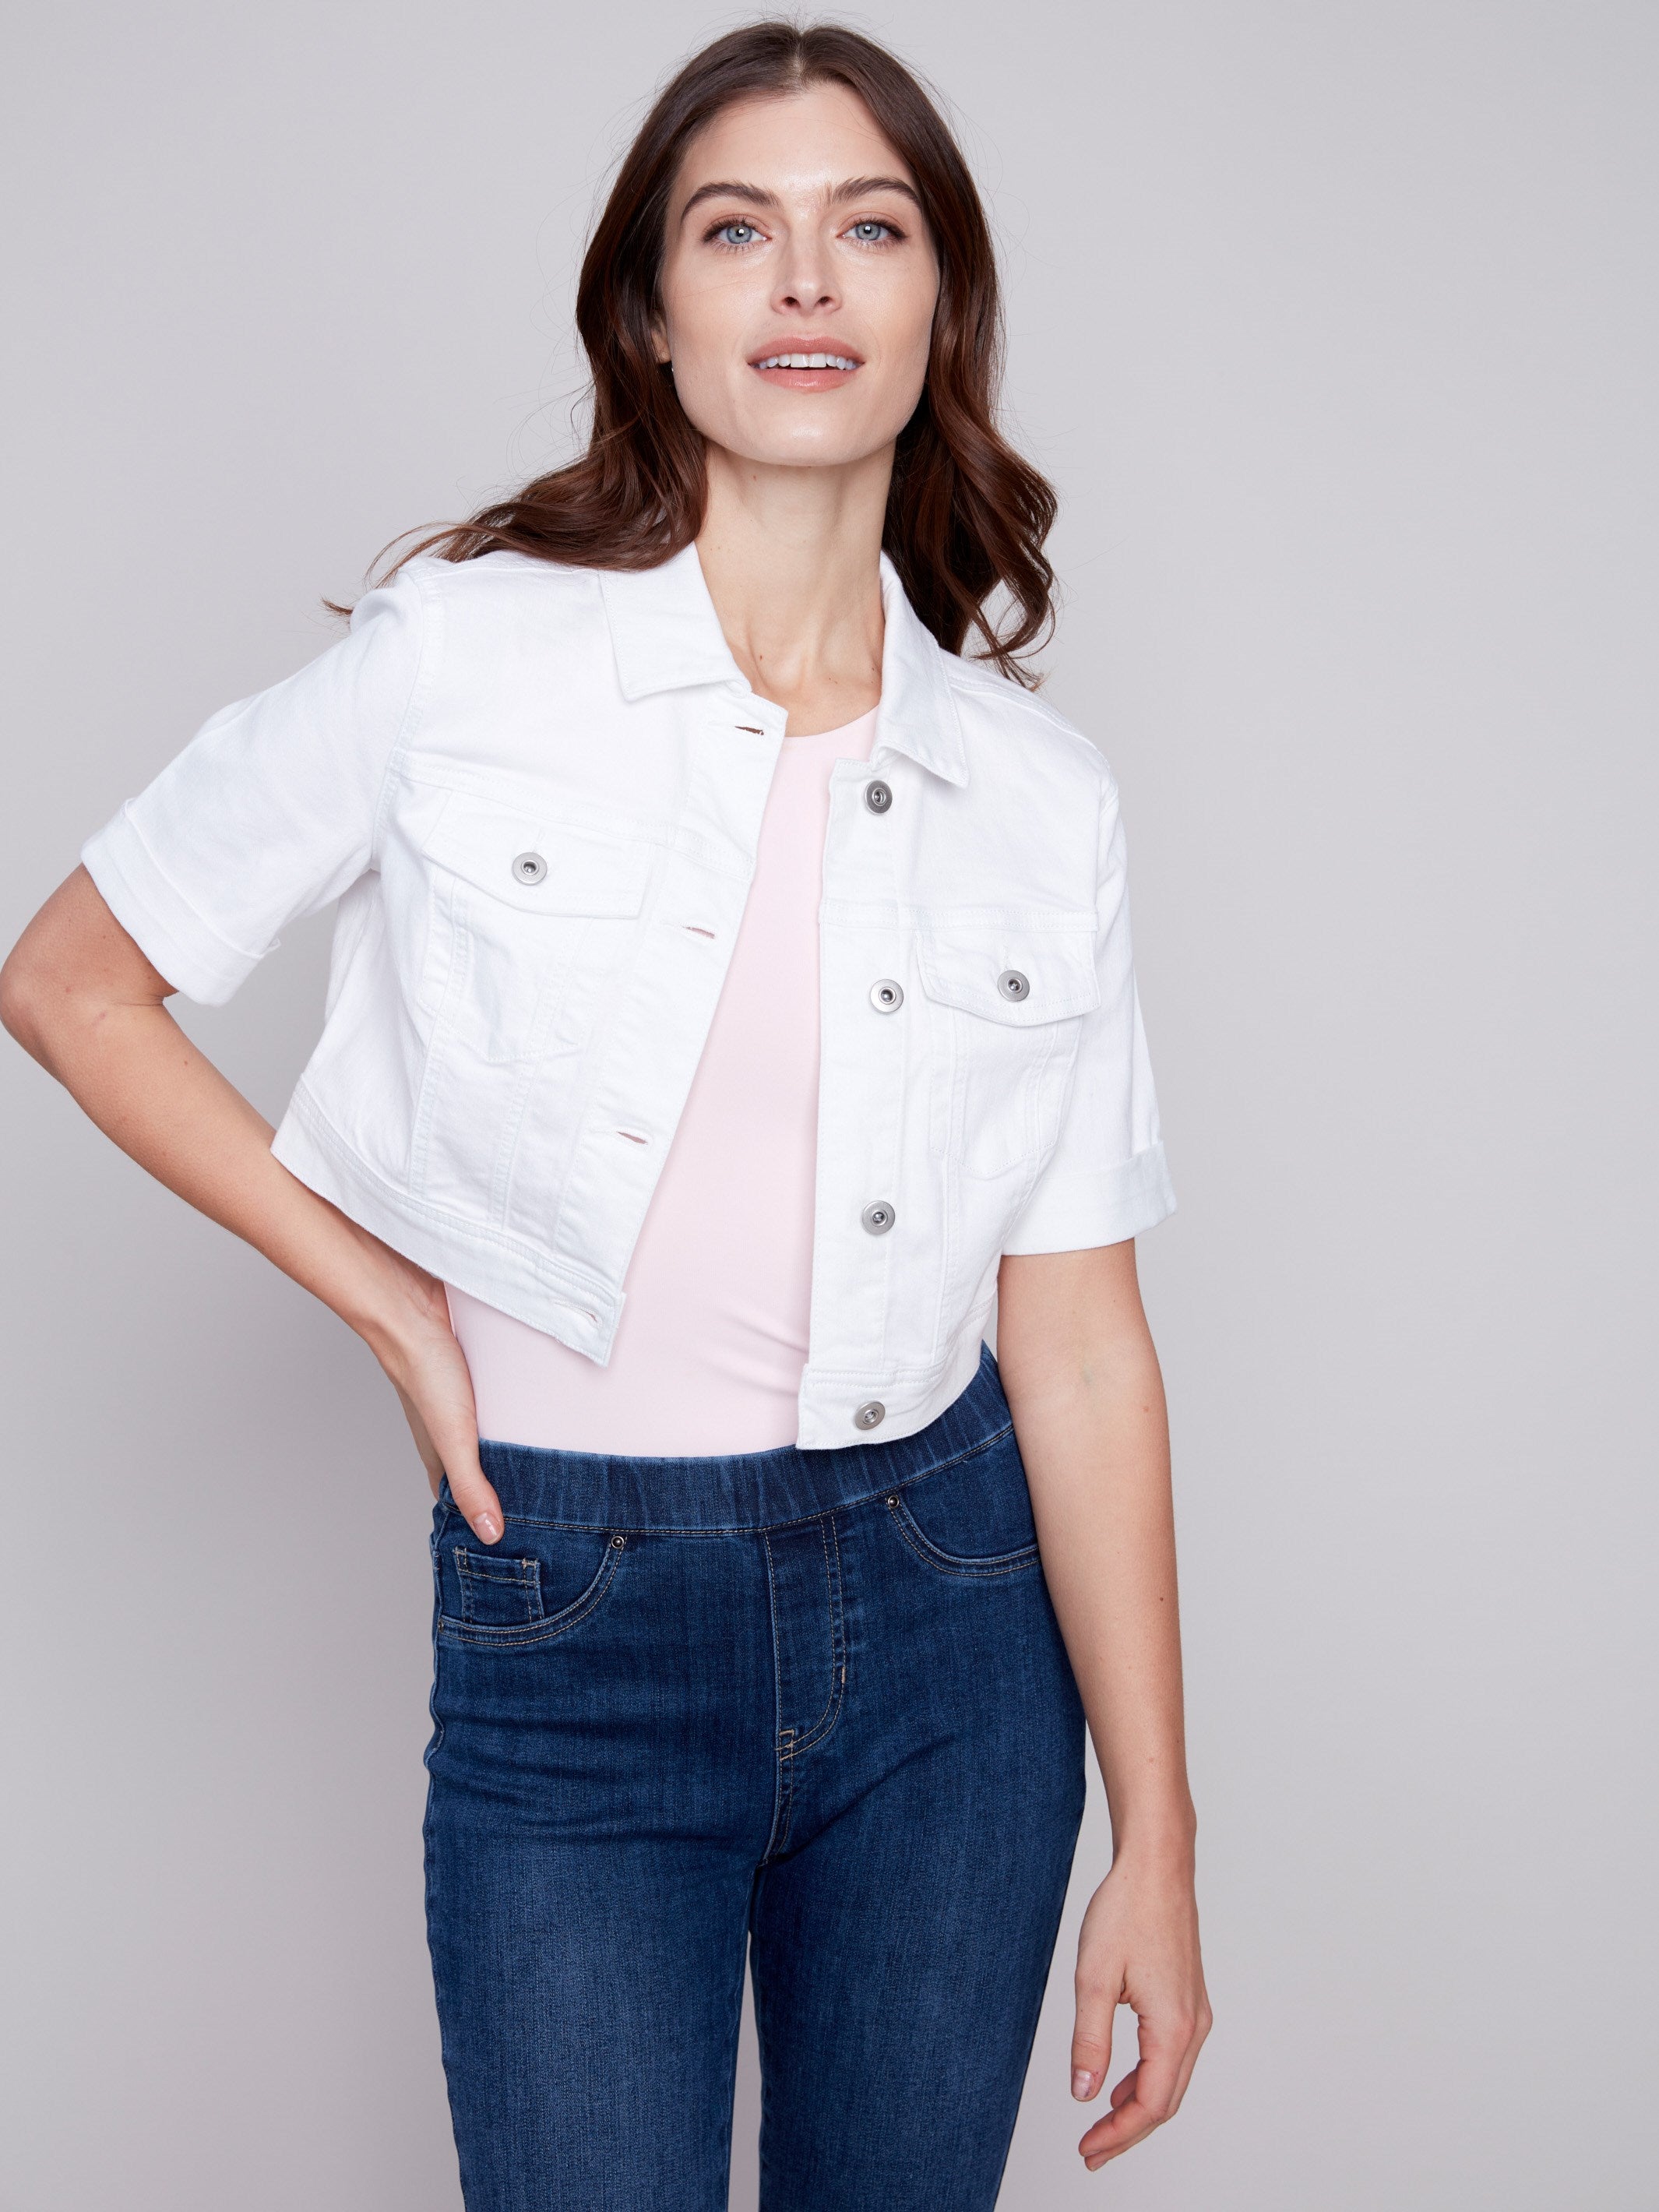 Cropped Twill Jean Jacket - White - Charlie B Collection Canada - Image 3